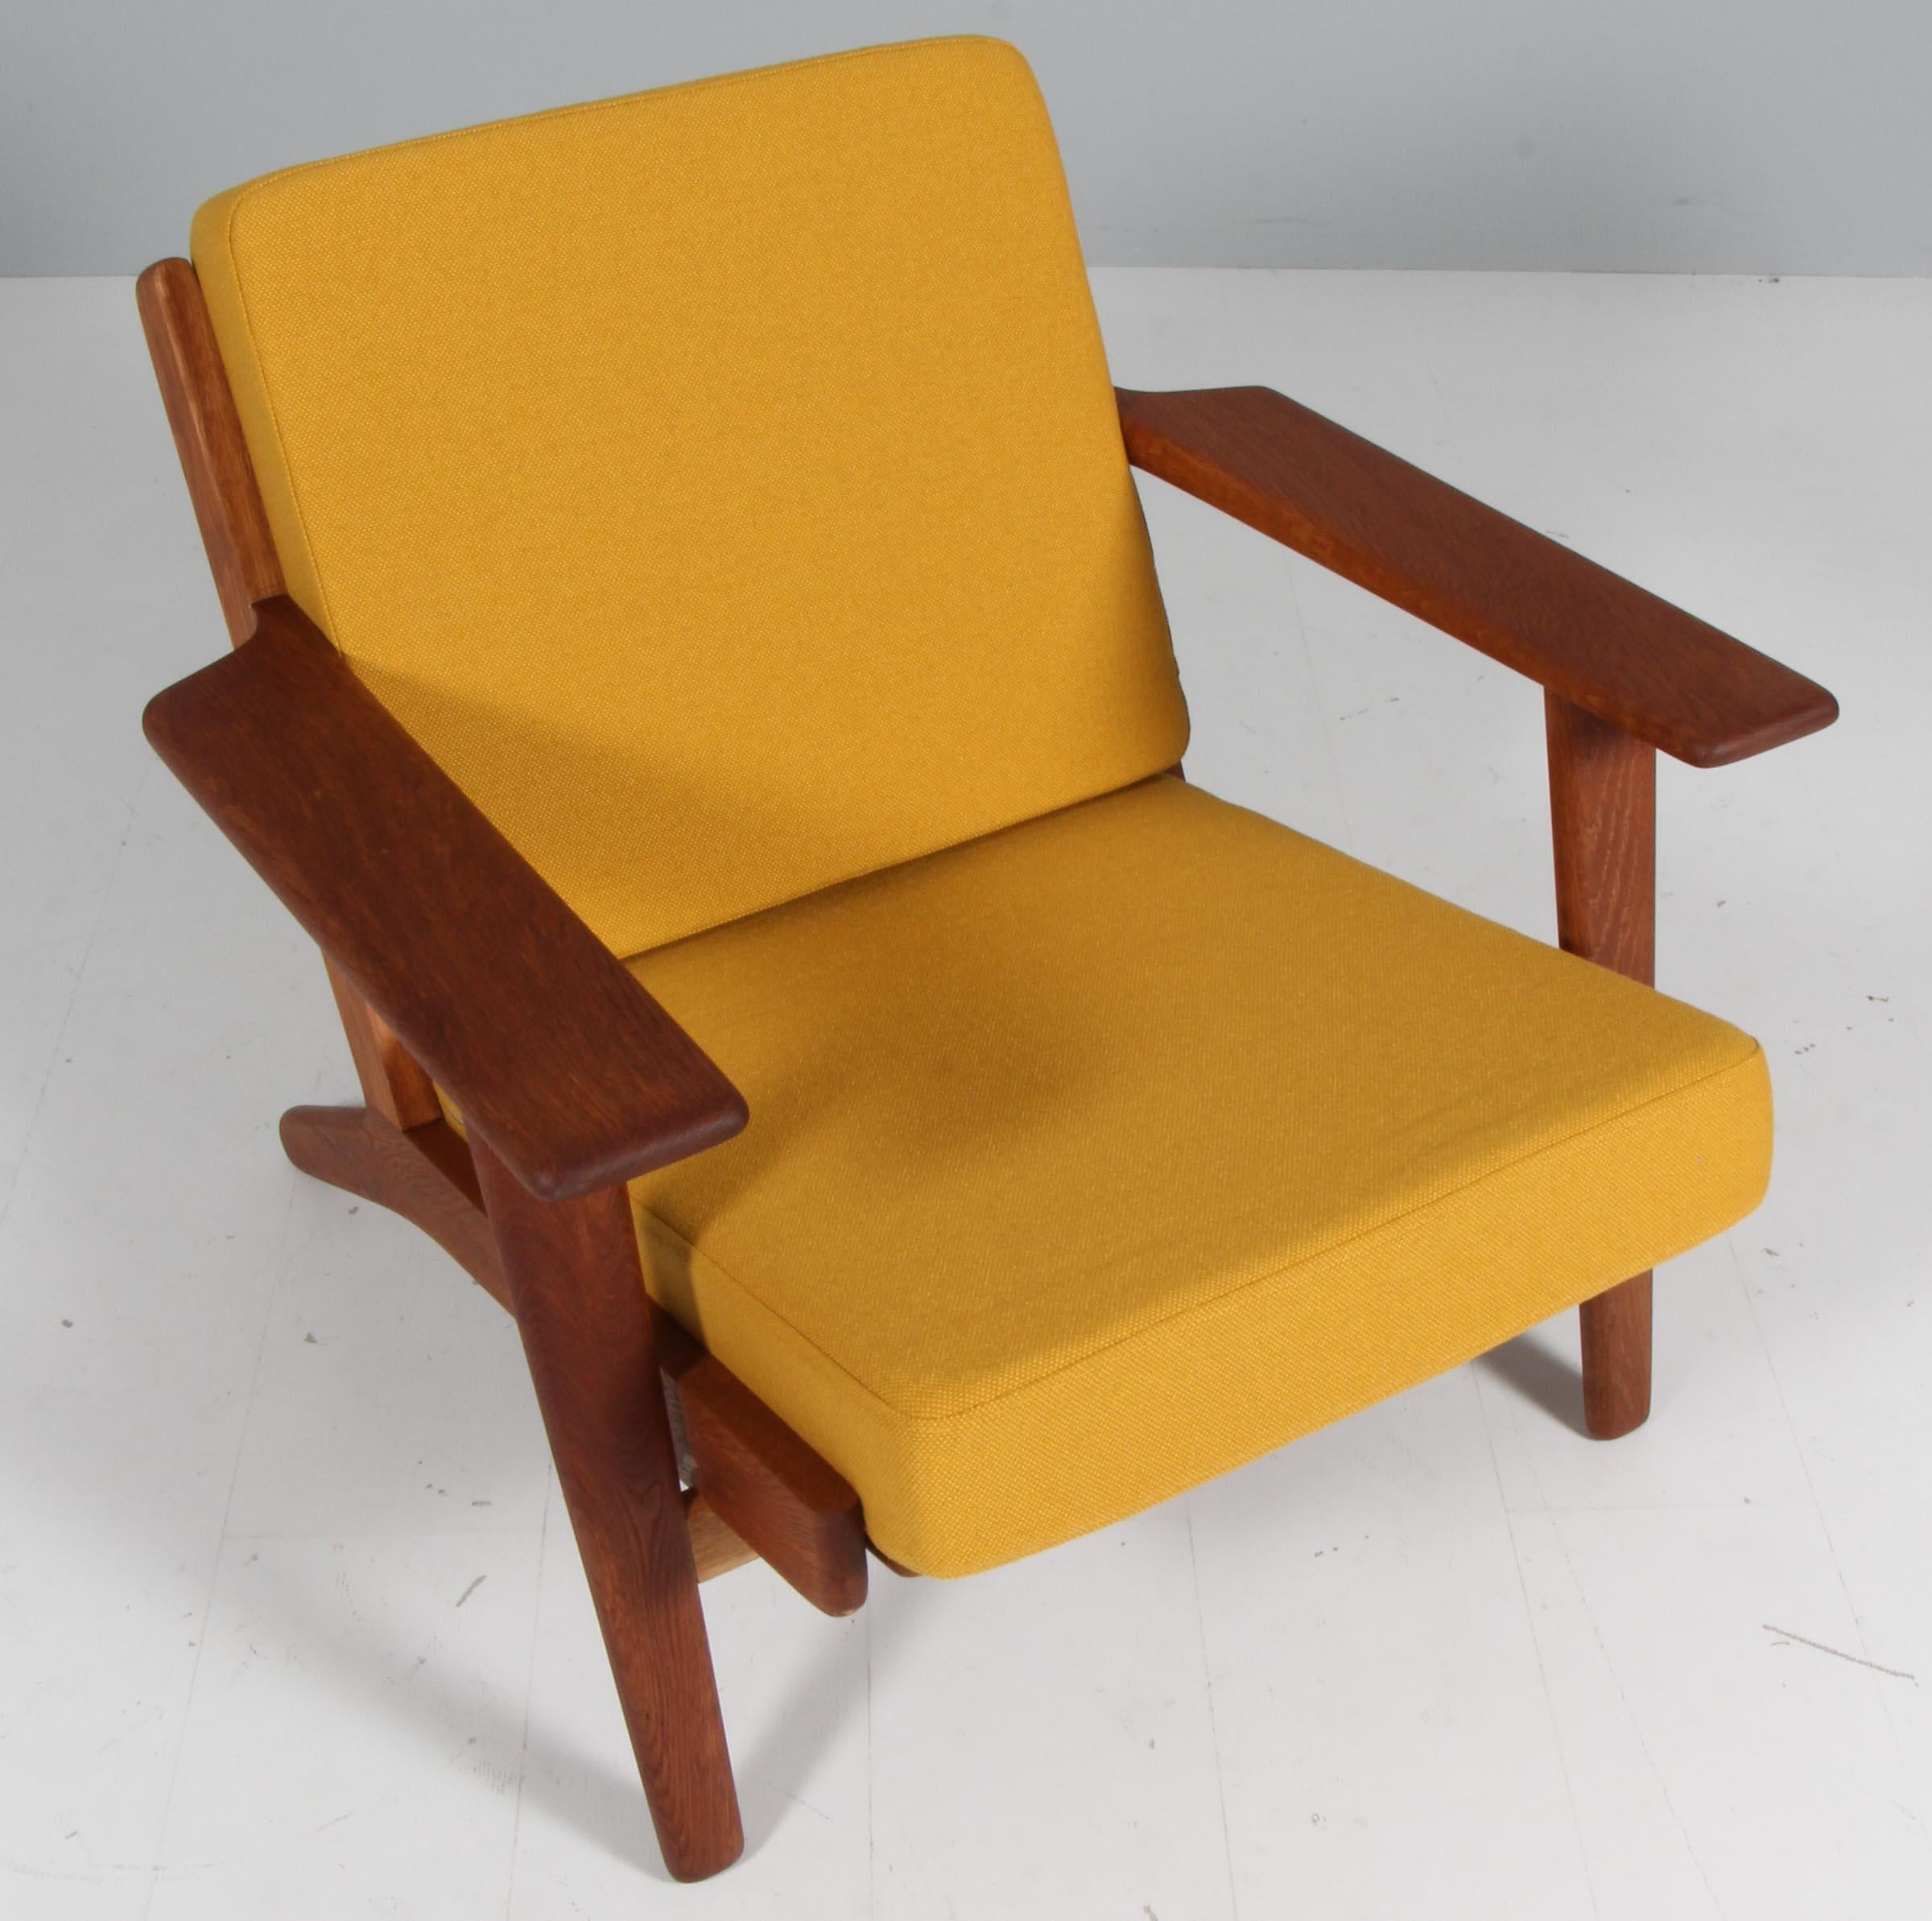 Hans J. Wegner lounge chair made of solid oil treated oak.

New upholstered with yellow Hallingdal wool from Kvadrat.

Model 290, made by GETAMA.

